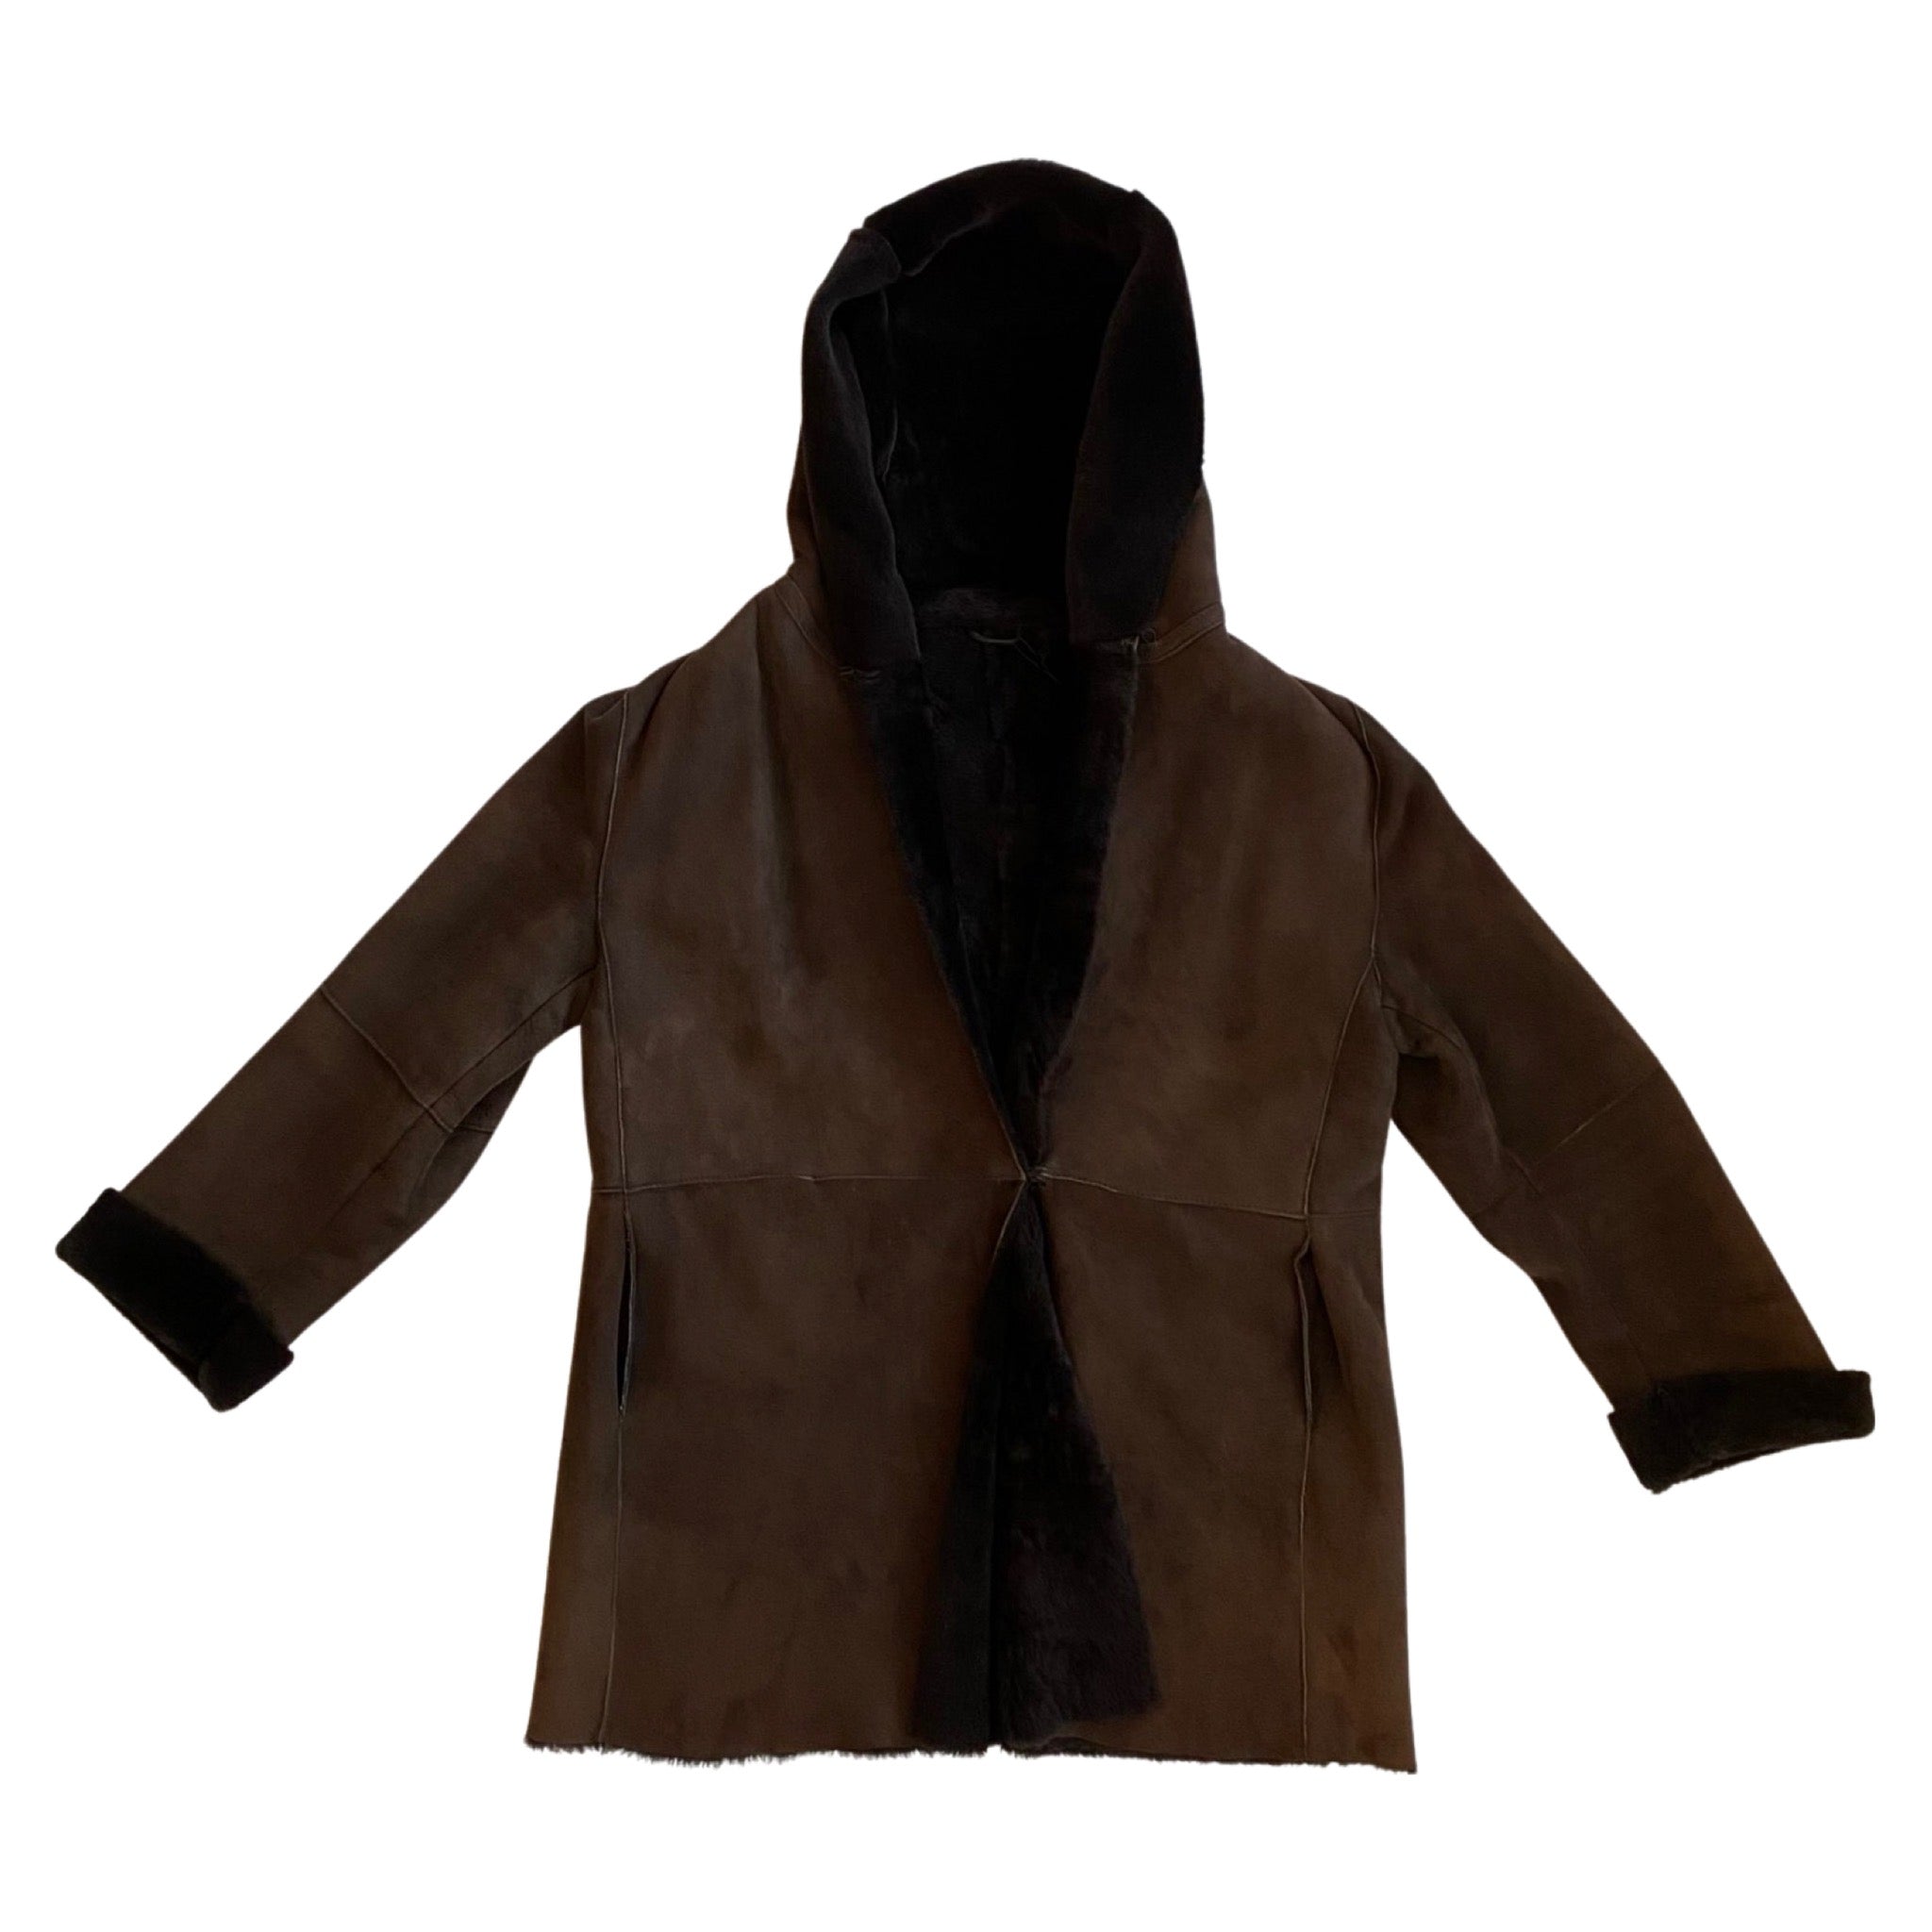 Brown Shearling Jacket with Hood